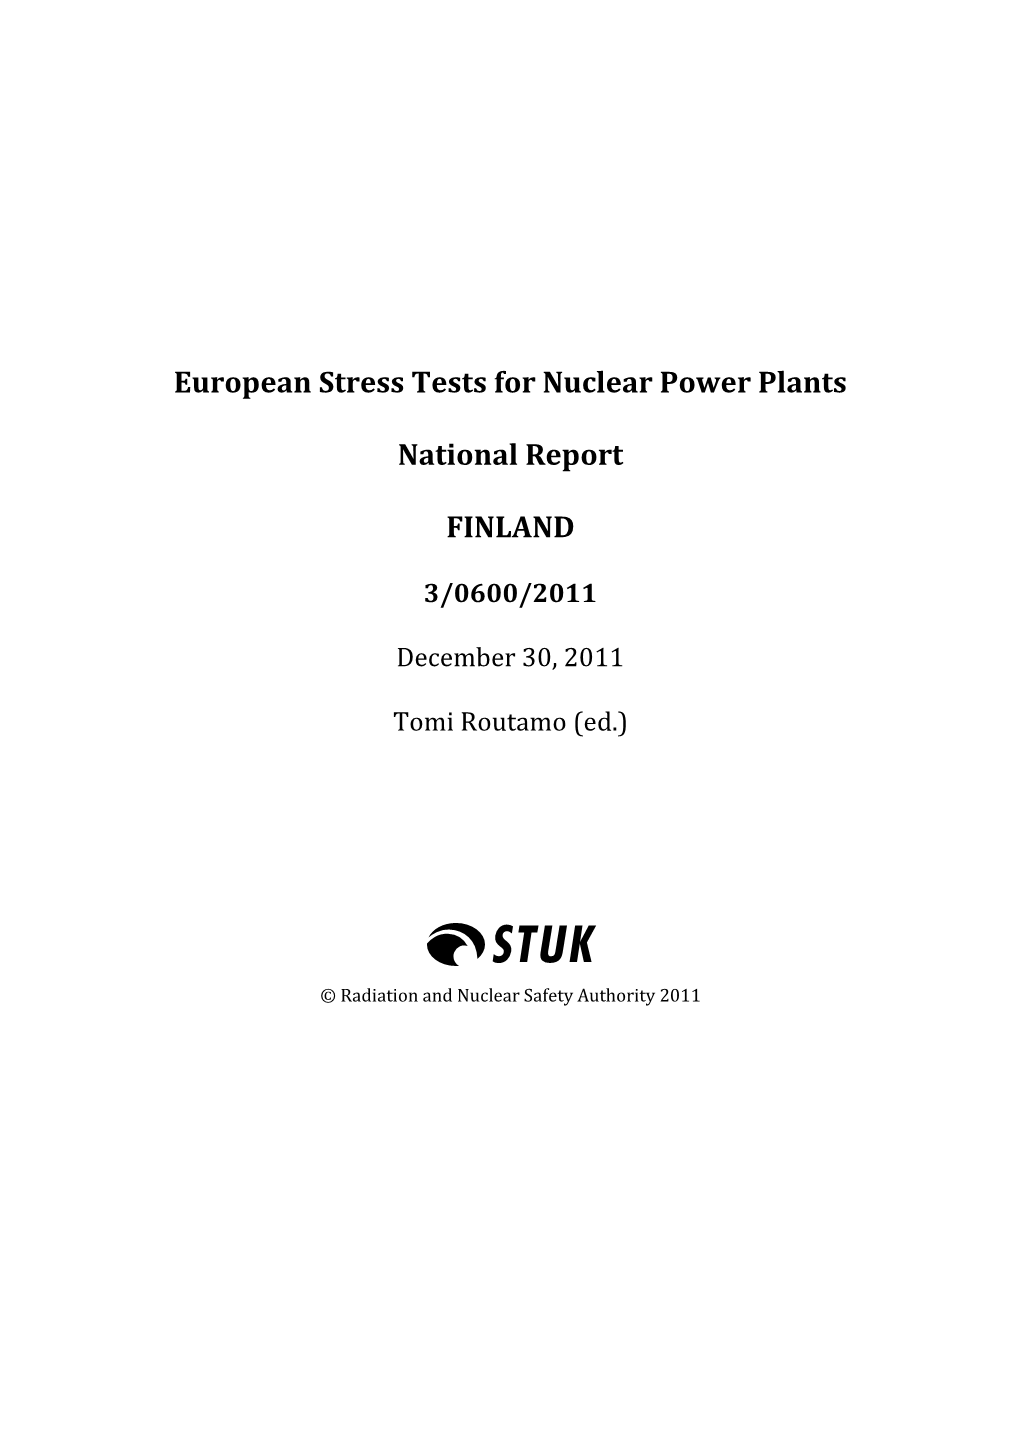 European Stress Tests for Nuclear Power Plants National Report